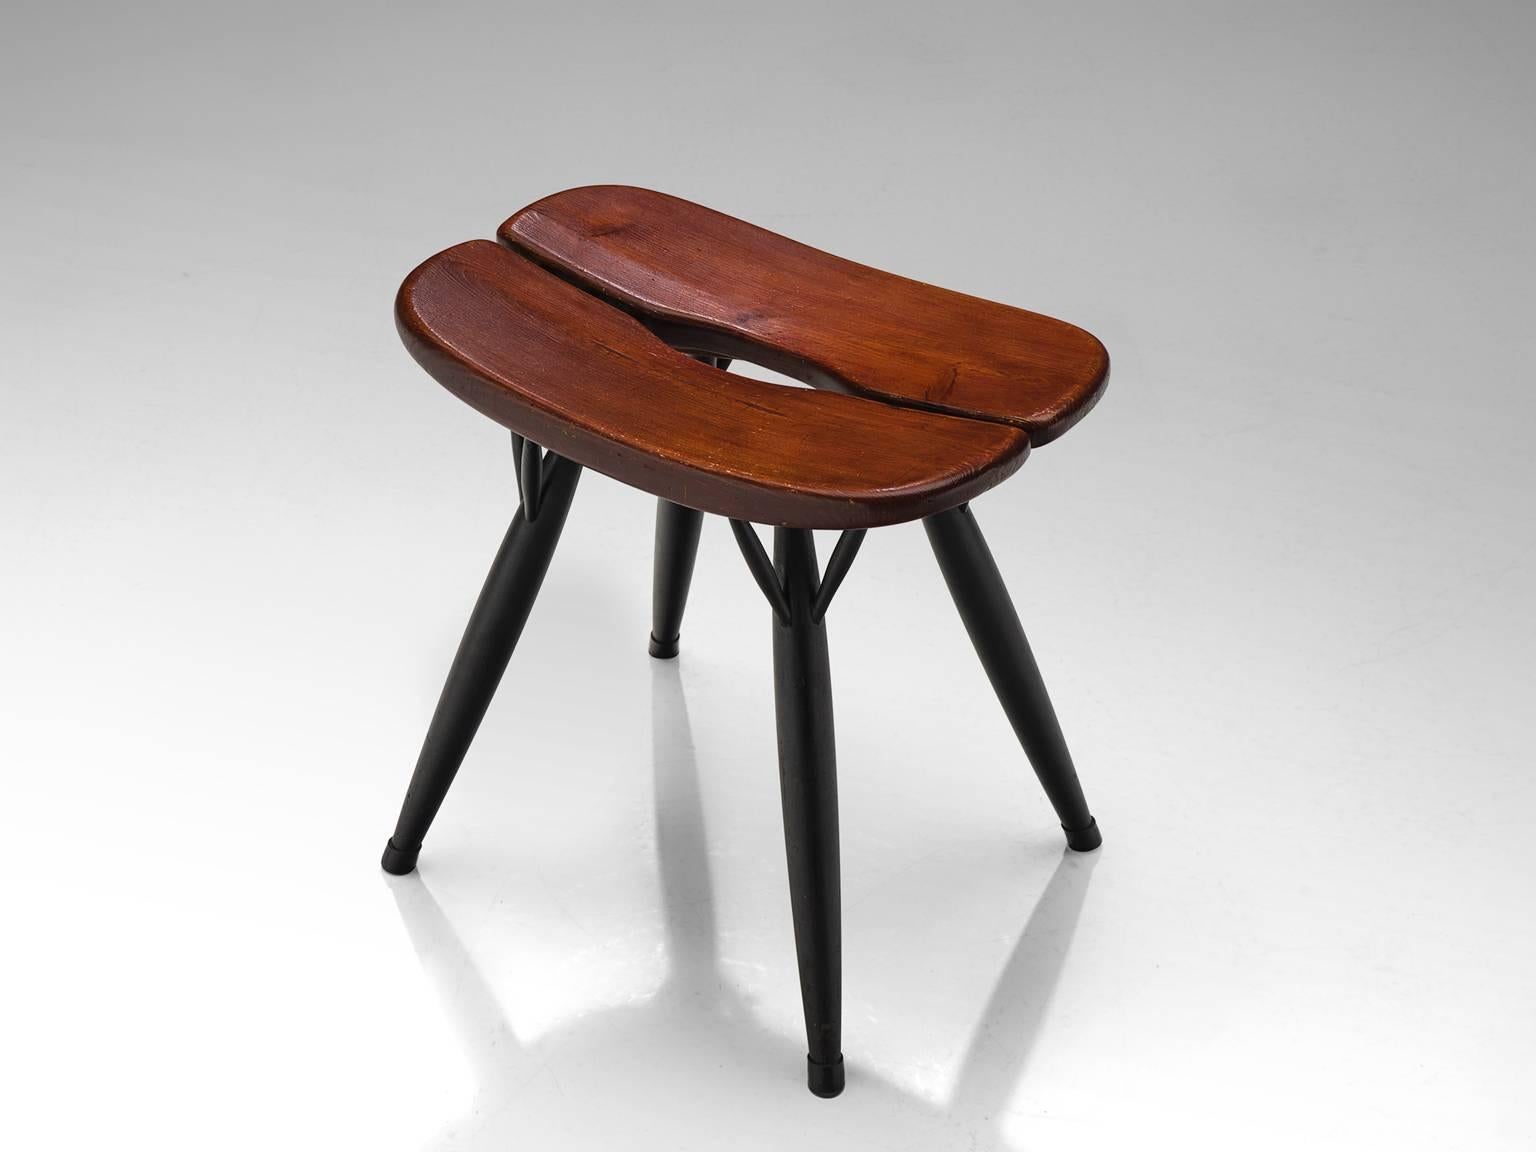 Ilmari Tapiovaara for Laukaan Puu, Pirkka stool, beech, pine, Finland, 1950s.

This stool is designed by Ilmari Tapiovaara. This stool was manufactured in the late 1950s. The stool was the first item from the Pirkka range, and was originally